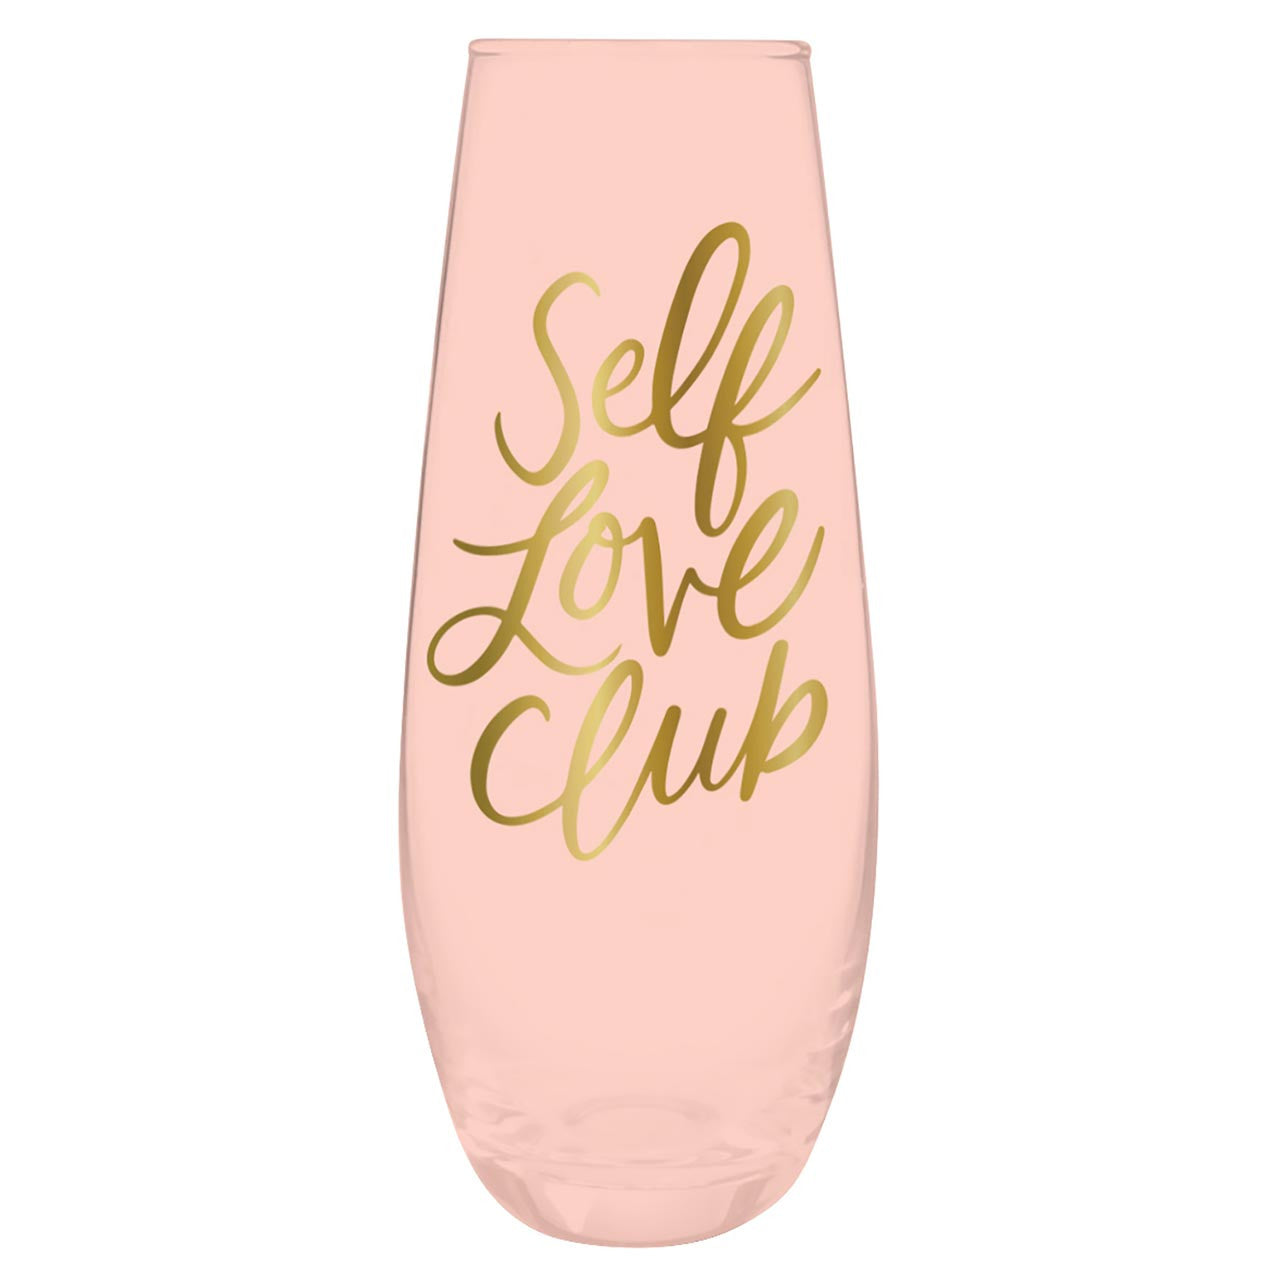 Self Love Club Stemless Champagne Flute Glass in Tinted Pink